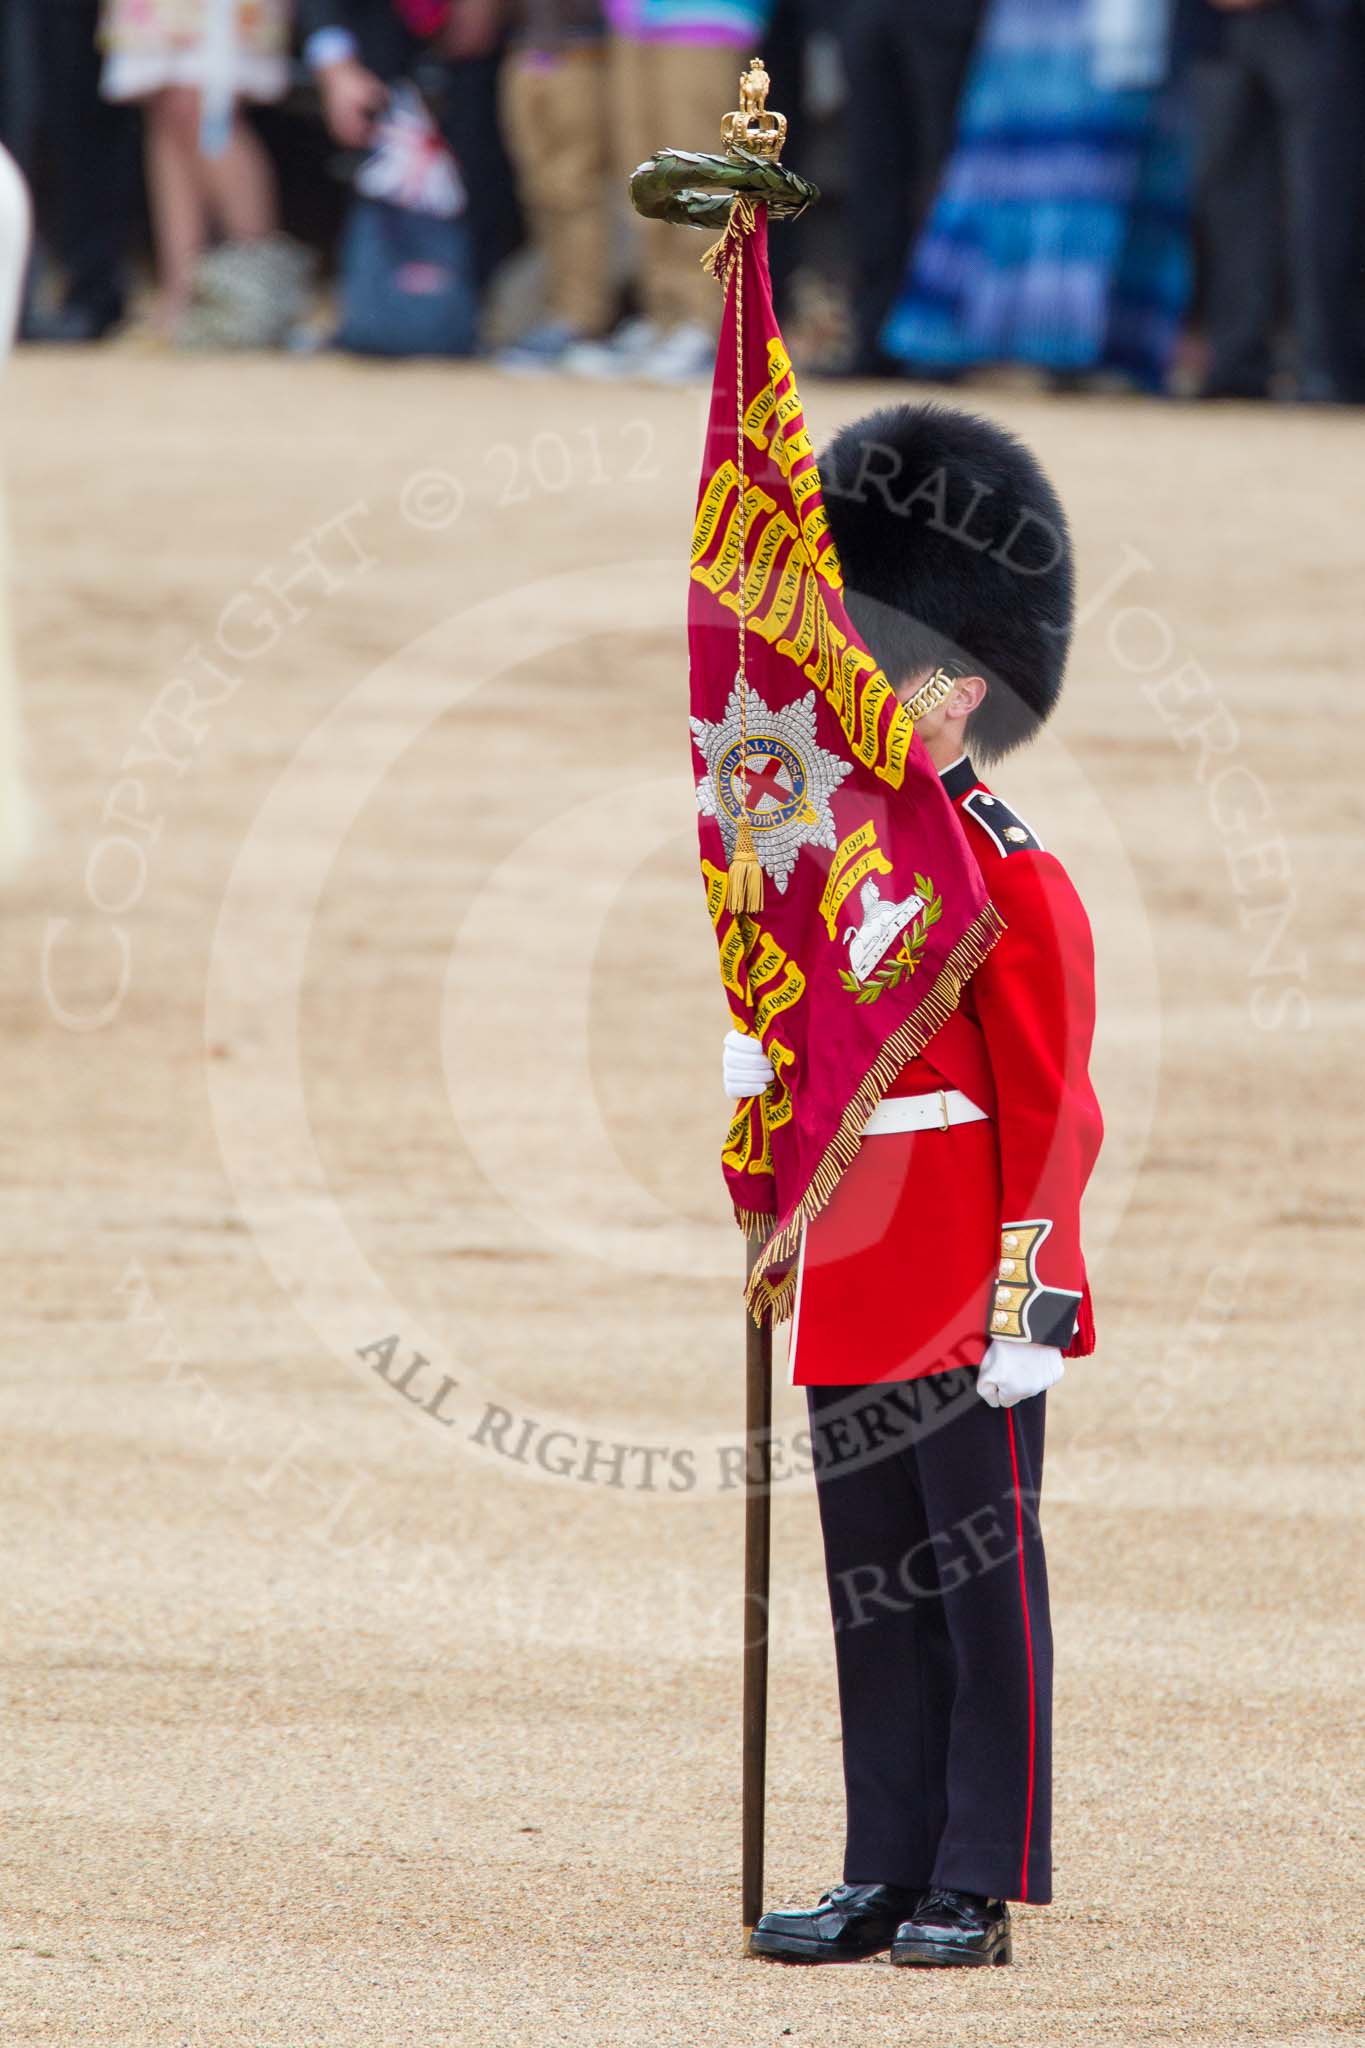 Trooping the Colour 2012: The Colour Sergeant, Paul Baines MC, with the Colour, the regimental flag of the Coldstream Guards..
Horse Guards Parade, Westminster,
London SW1,

United Kingdom,
on 16 June 2012 at 11:17, image #292